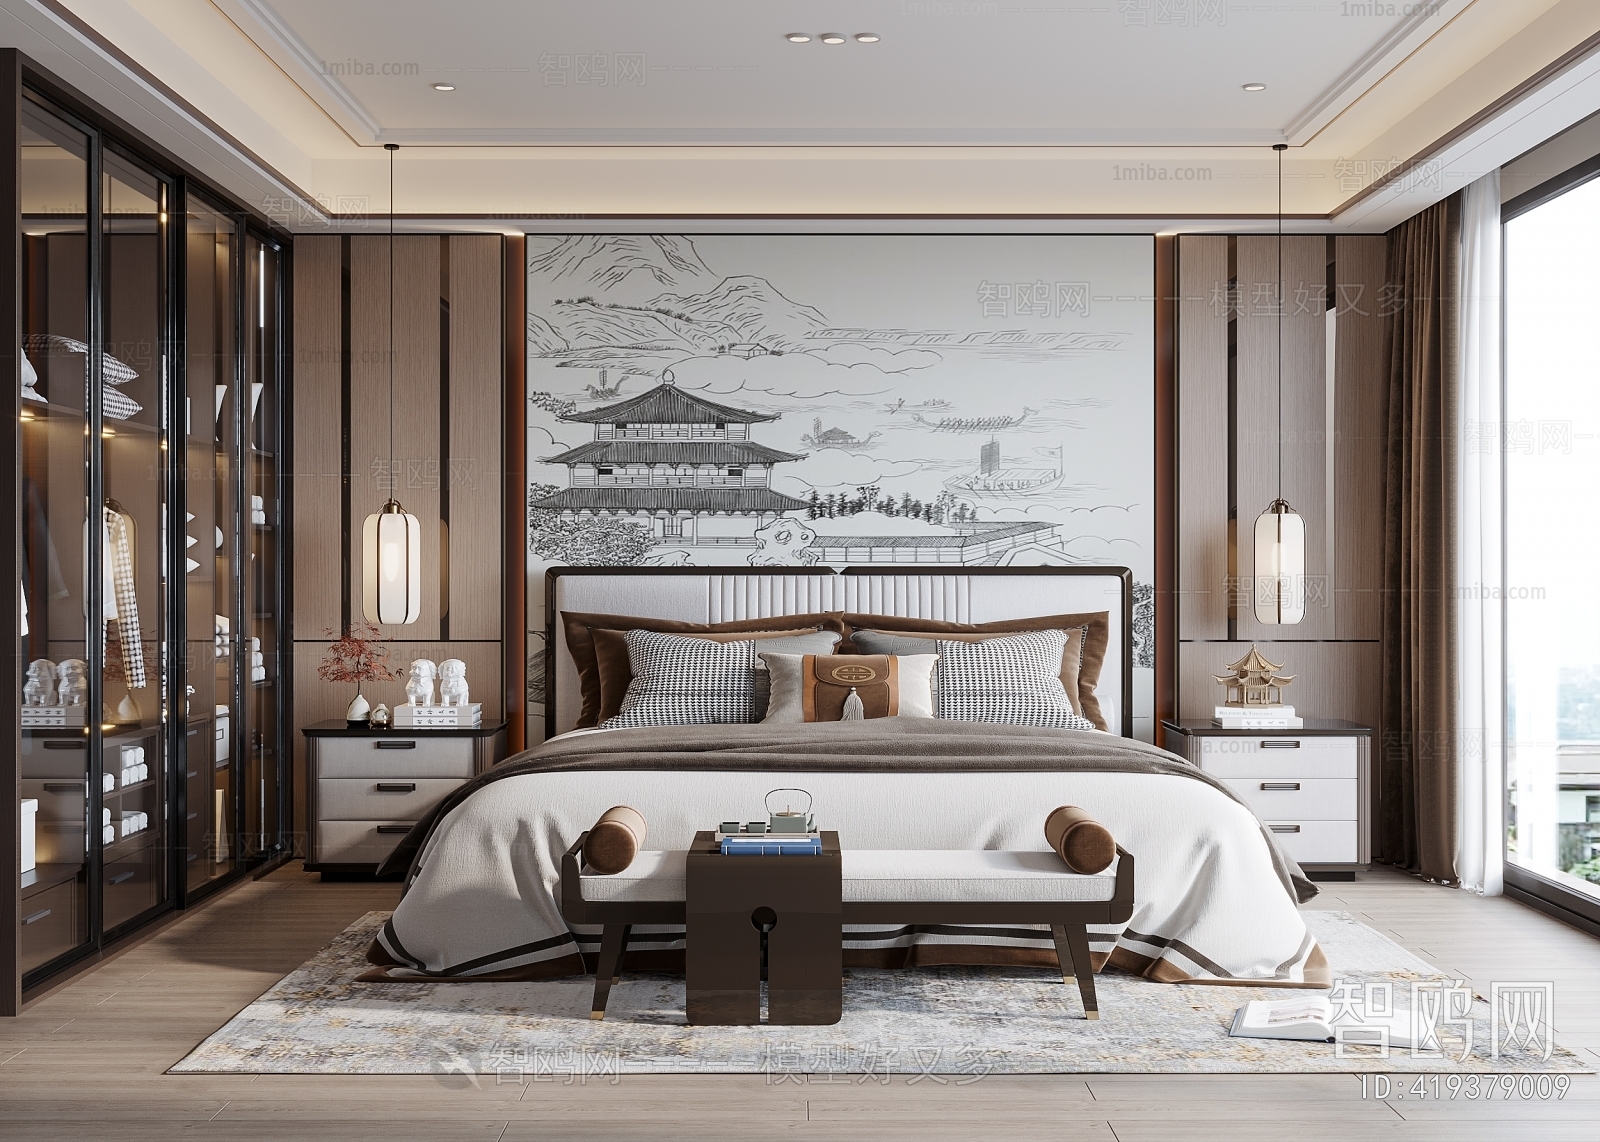 New Chinese Style Bedroom sketchup Model Download - Model ID.419379009 ...